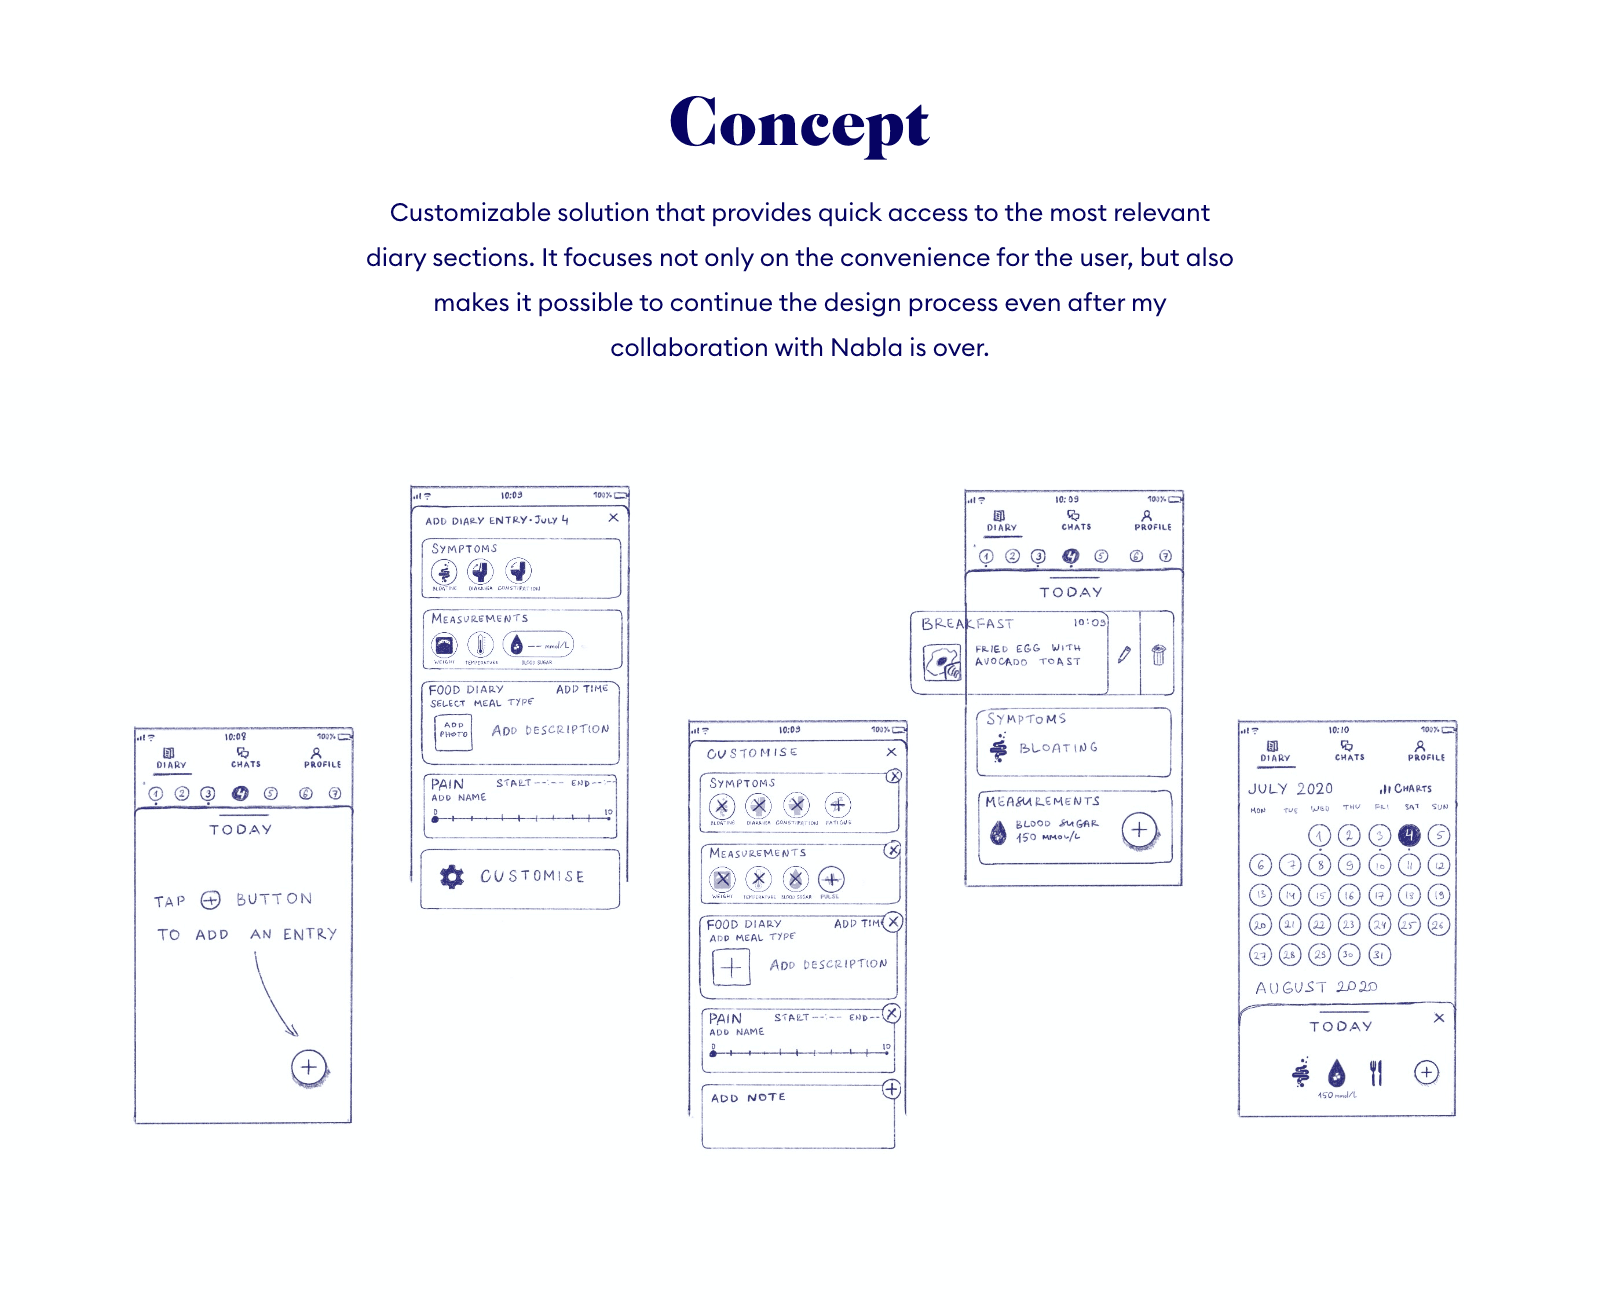 Concept of the symptom tracker with simple wireframes